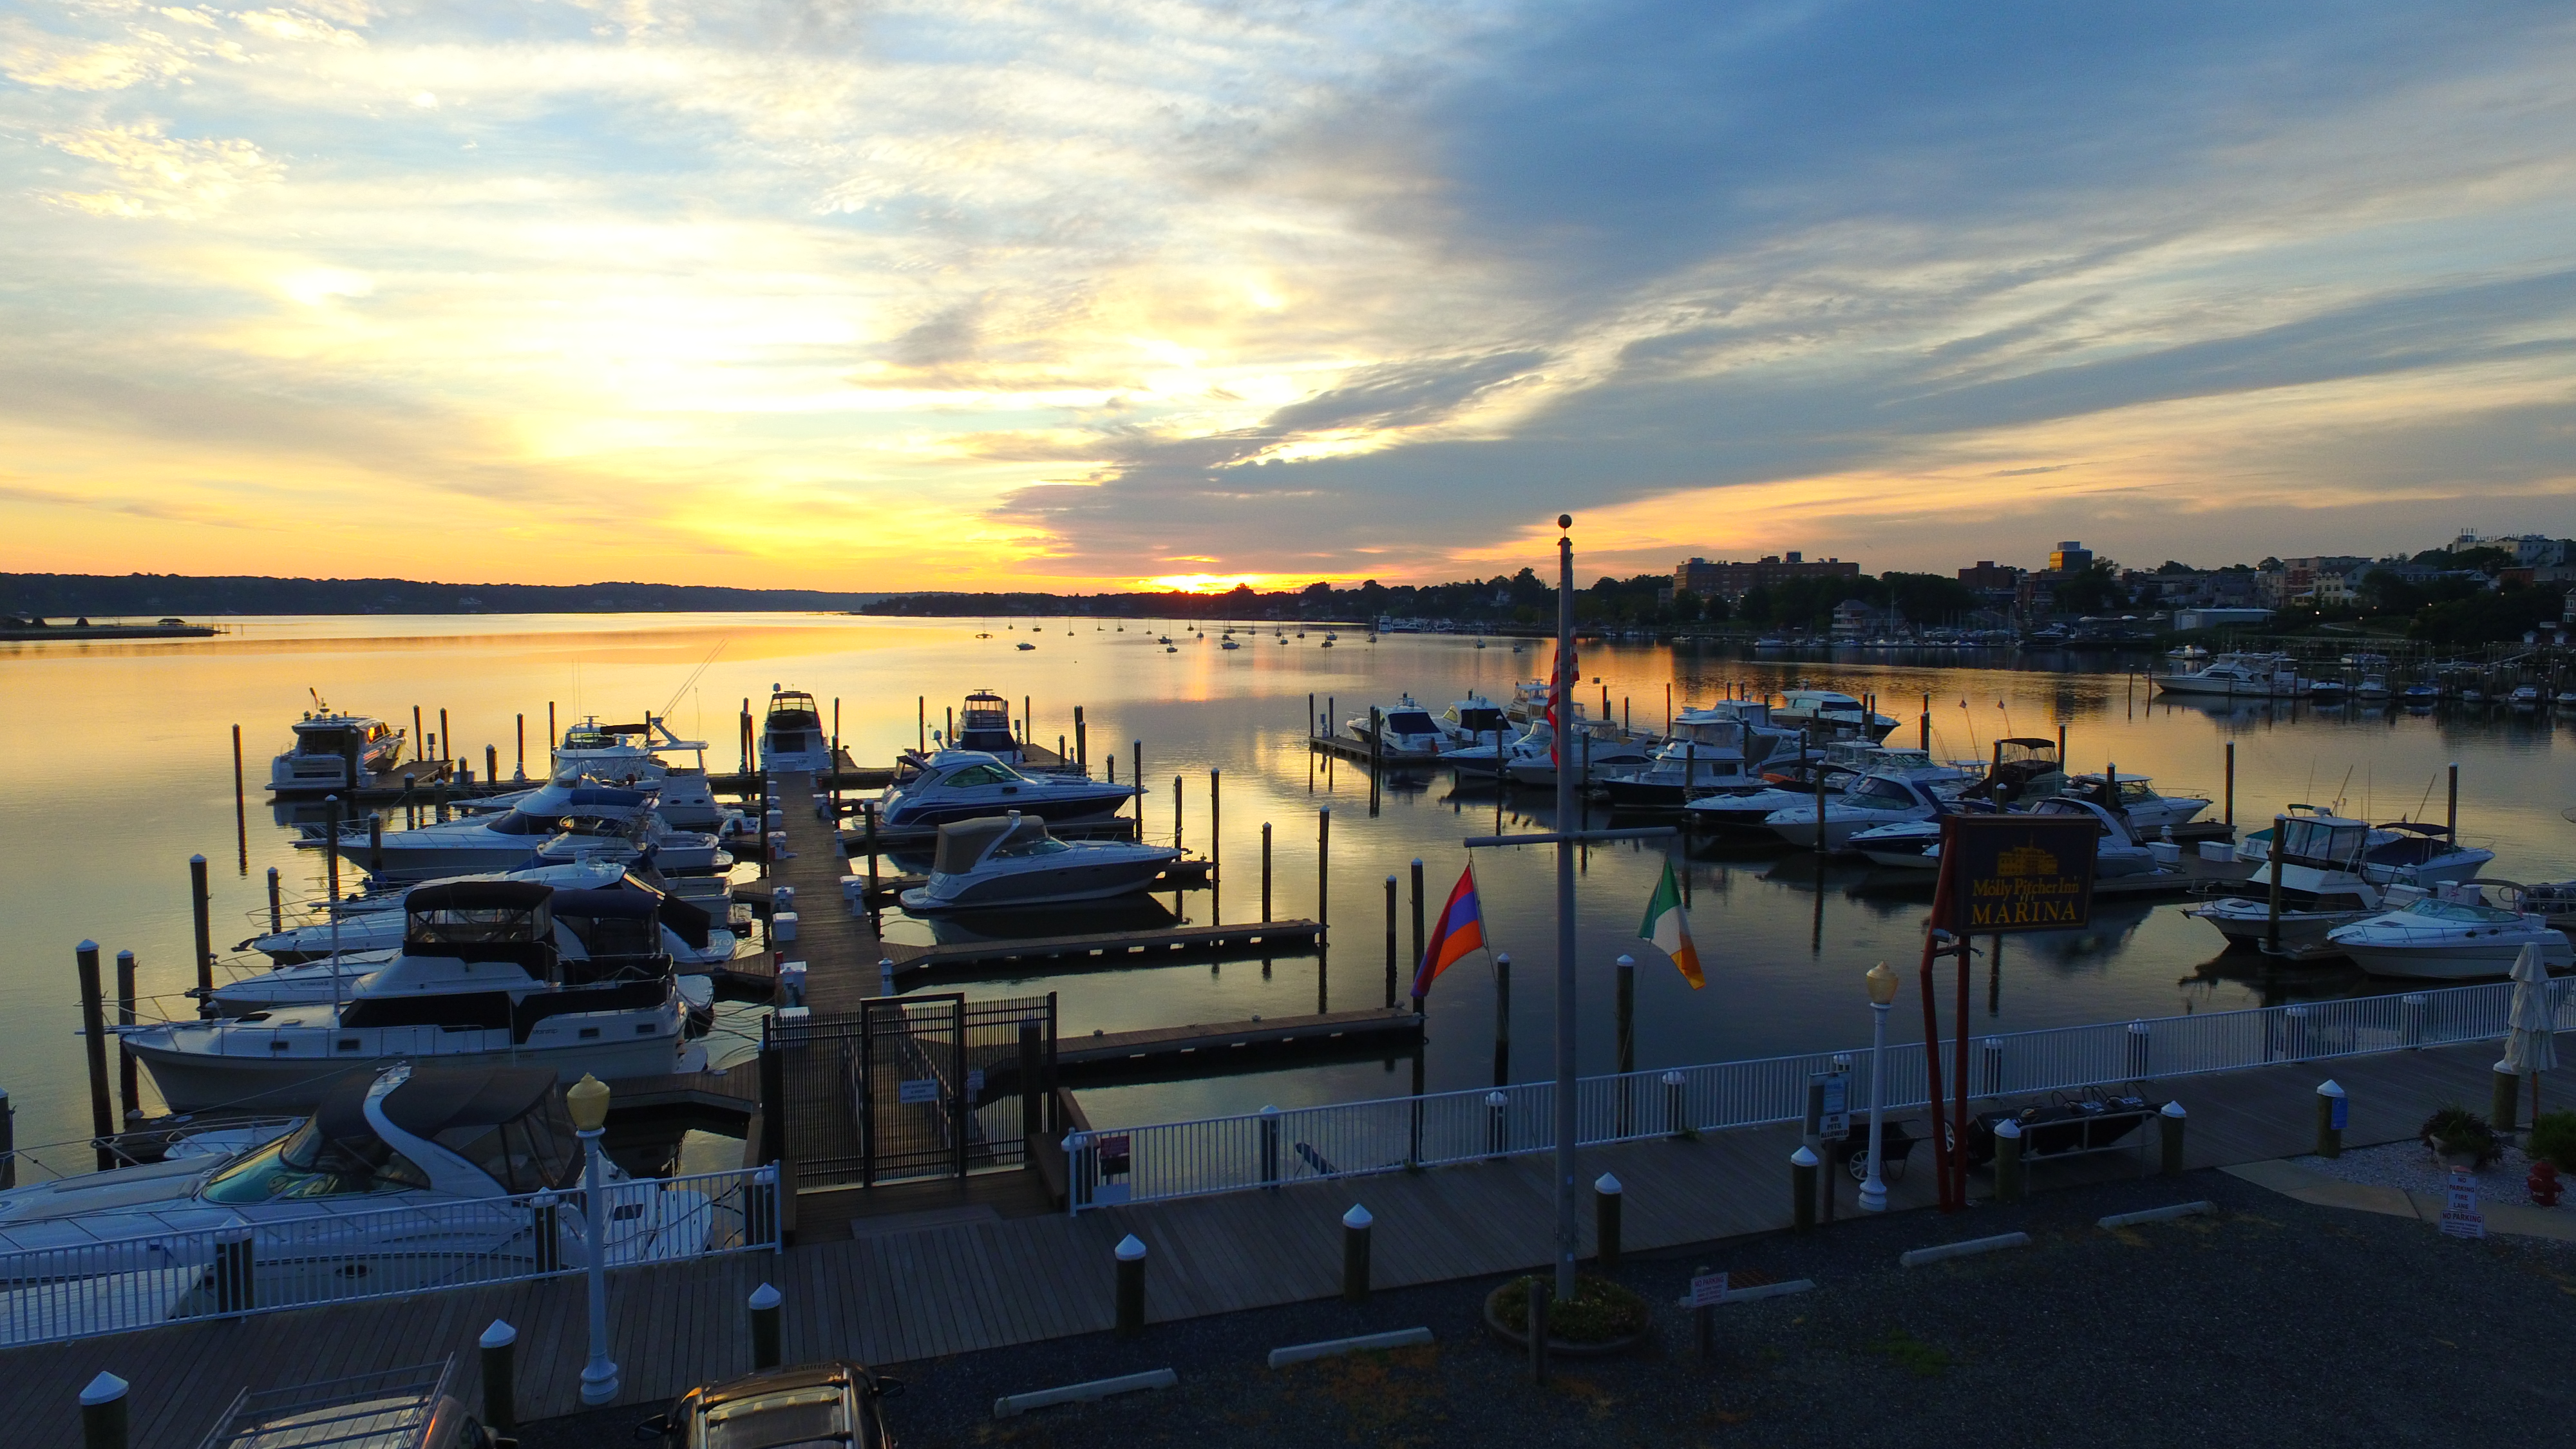 Molly Pitcher Marina in Red Bank, NJ